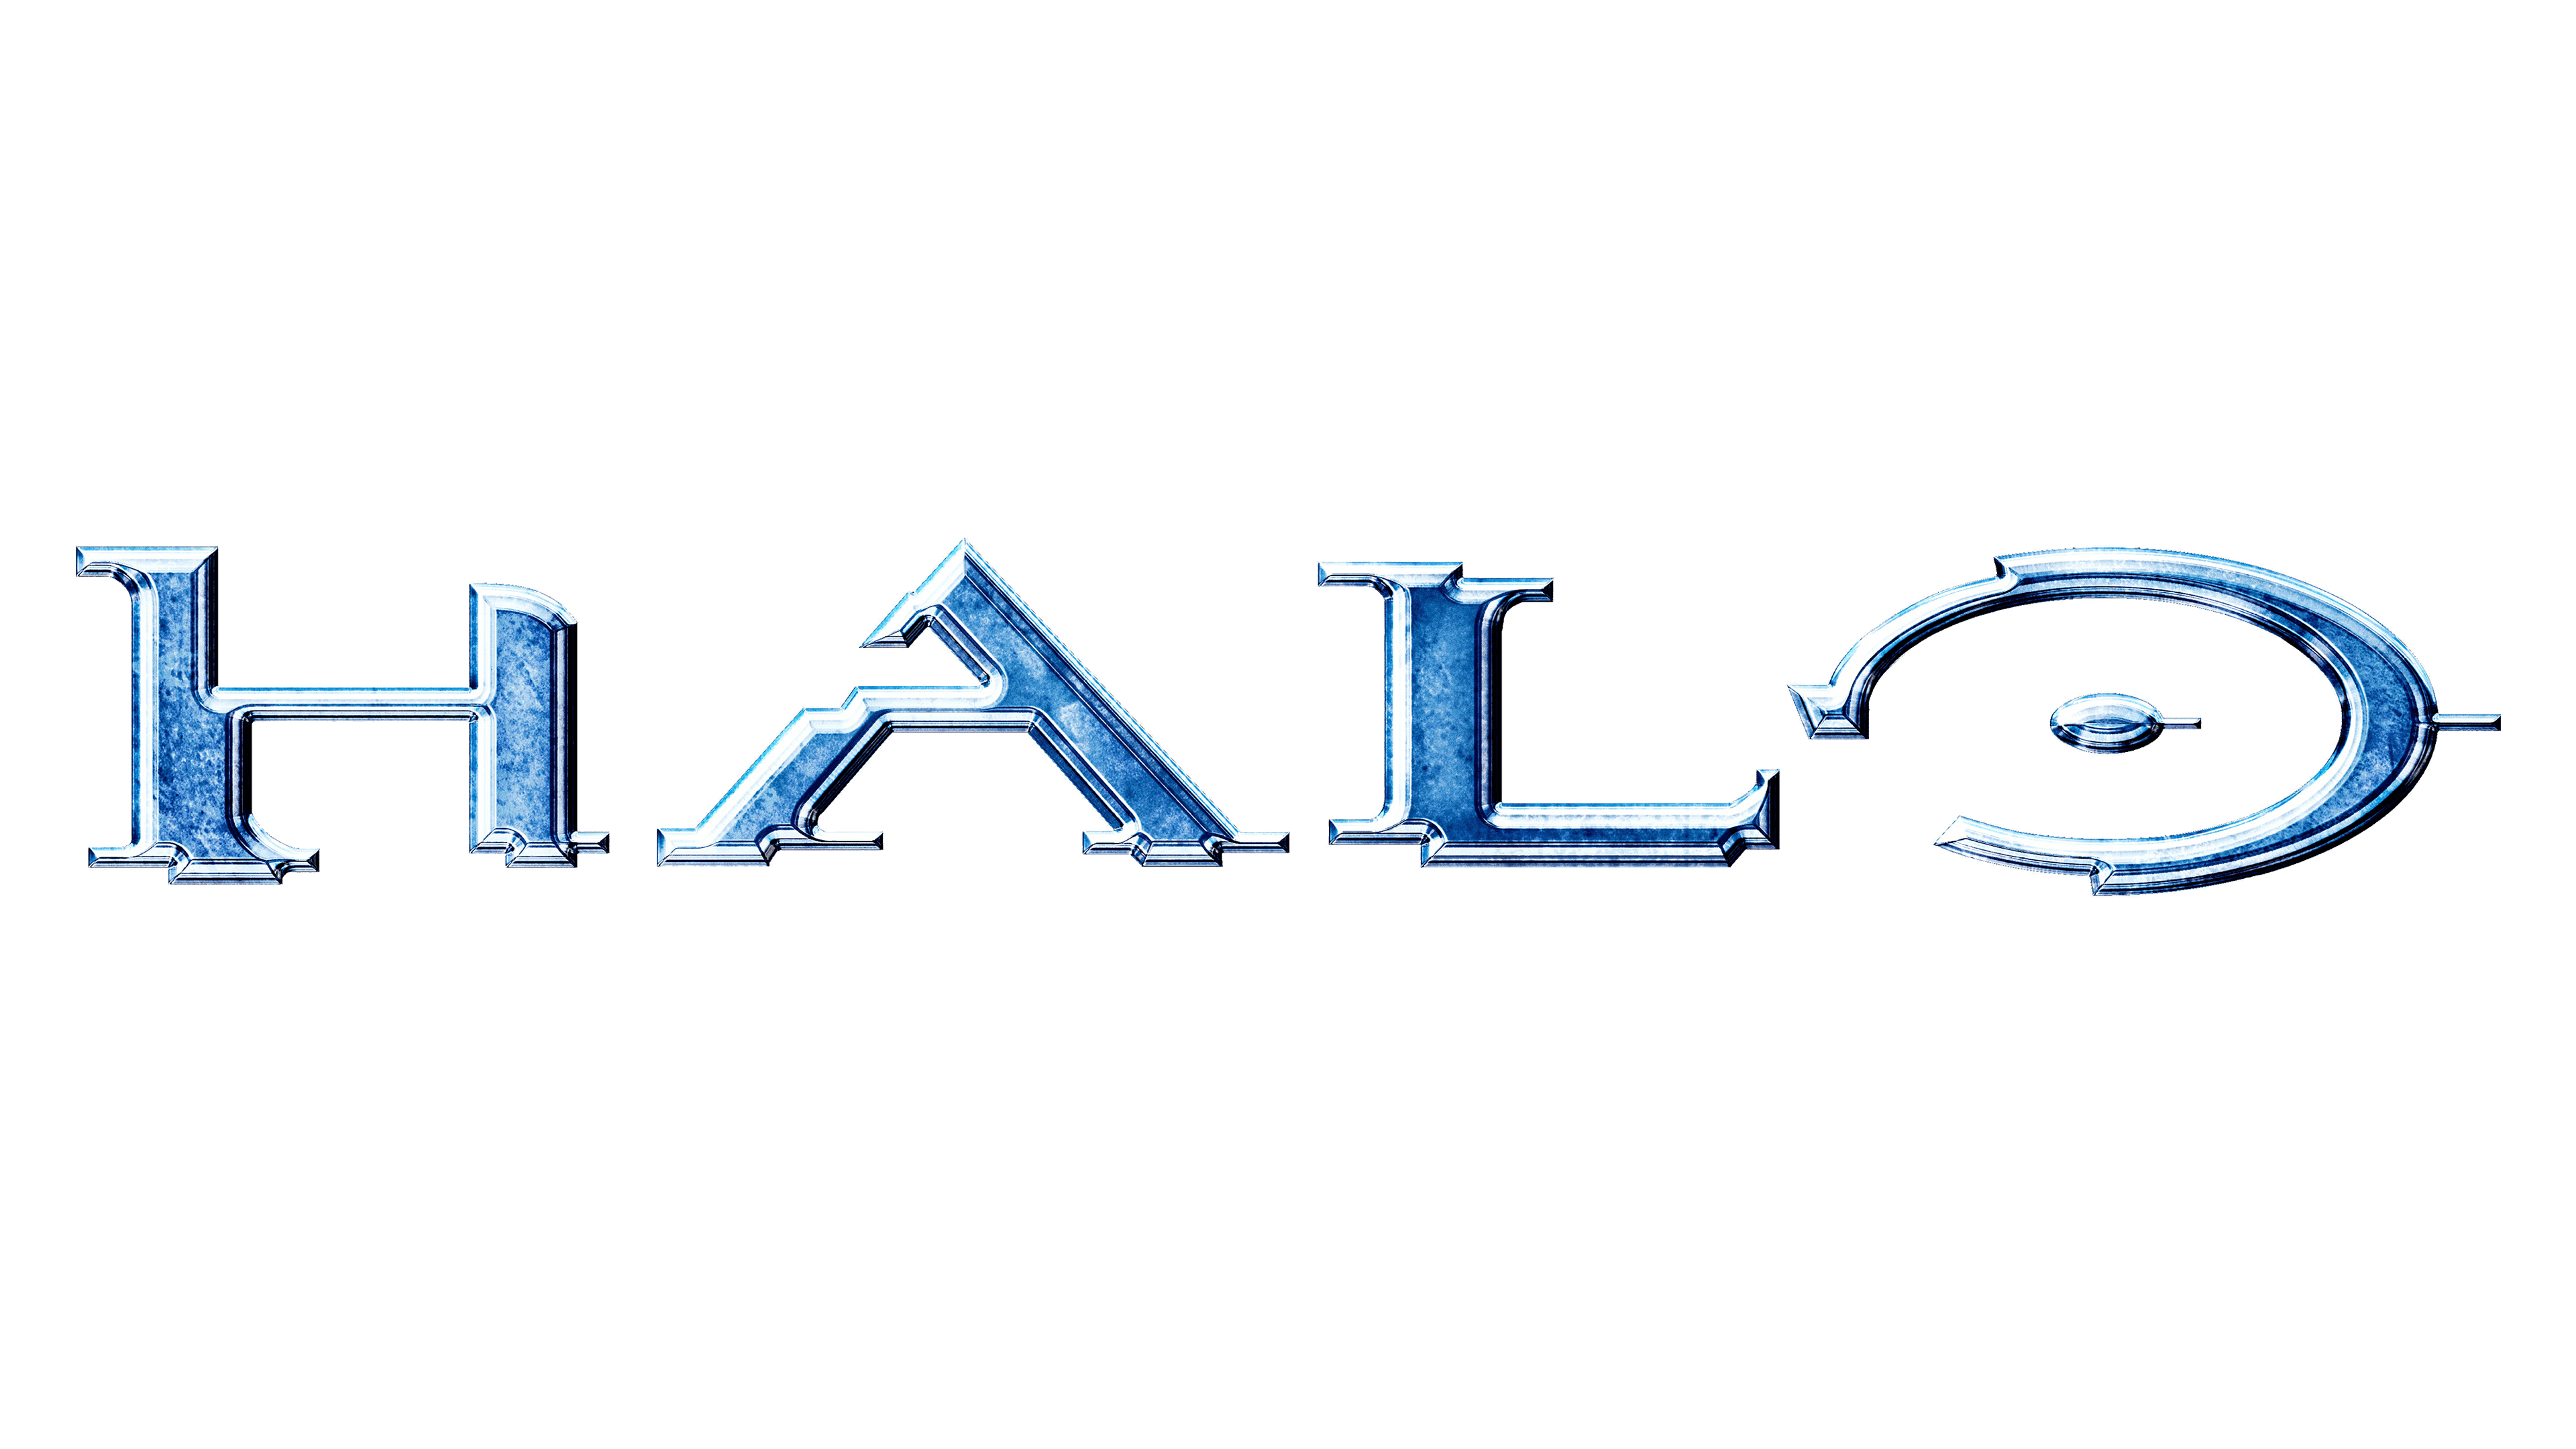 Halo Name Meaning